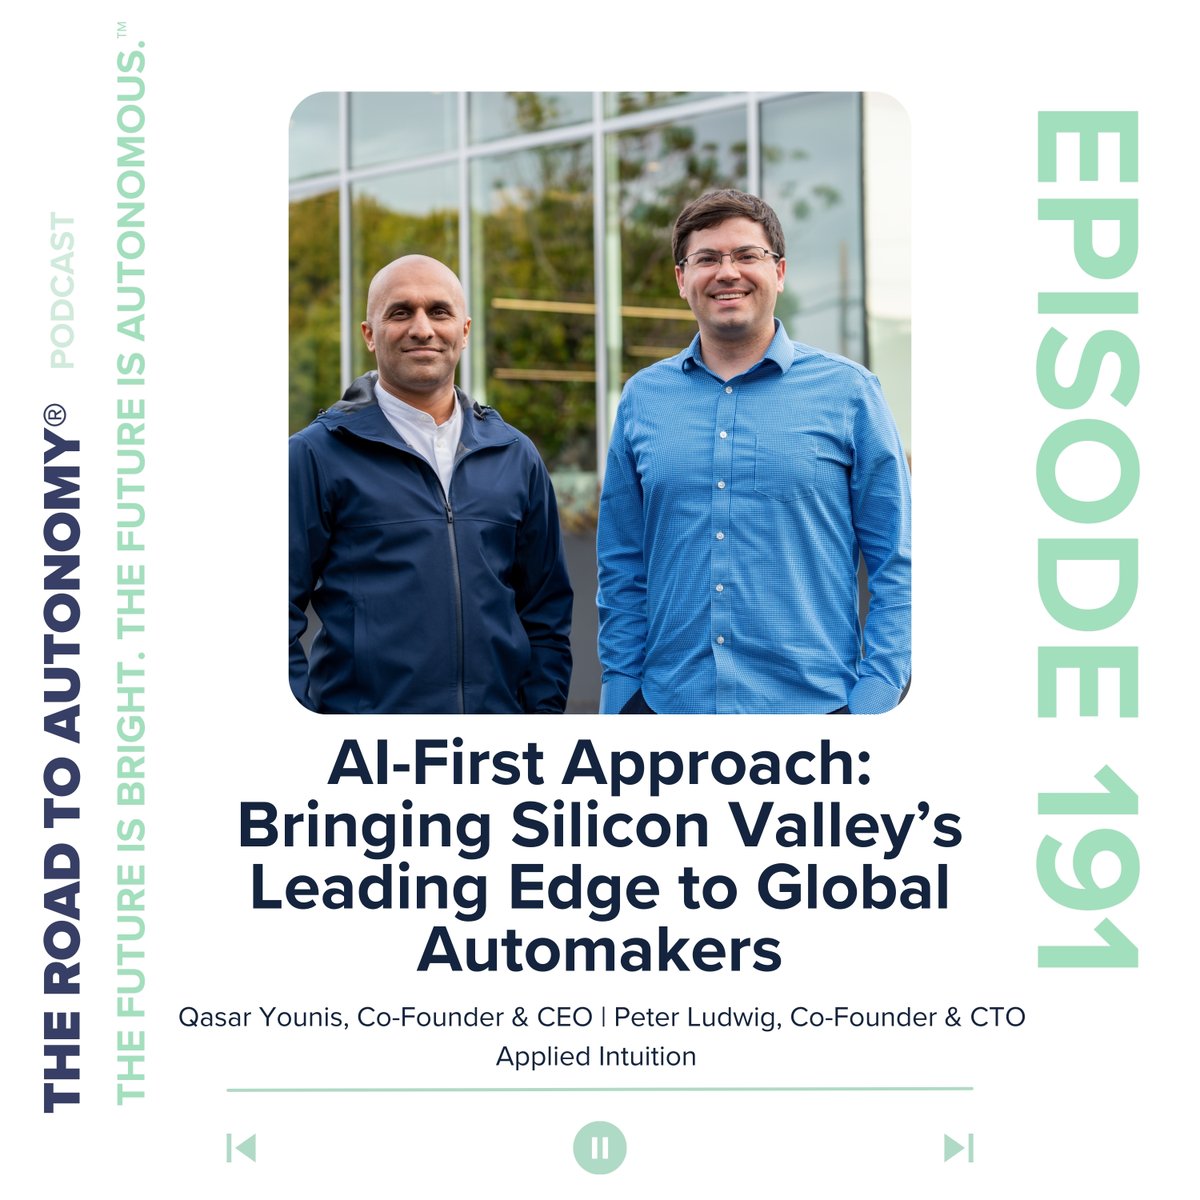 AI-First Approach: Bringing Silicon Valley's Leading Edge to Global Automakers 🎧 Listen on Apple Podcasts: podcasts.apple.com/us/podcast/the… 🎧 Listen on Spotify: open.spotify.com/episode/4rLkfr… 🎥 Watch on X: x.com/RoadToAutonomy… 🎥 Watch on YouTube: youtu.be/yZdohkU8w5A?si…